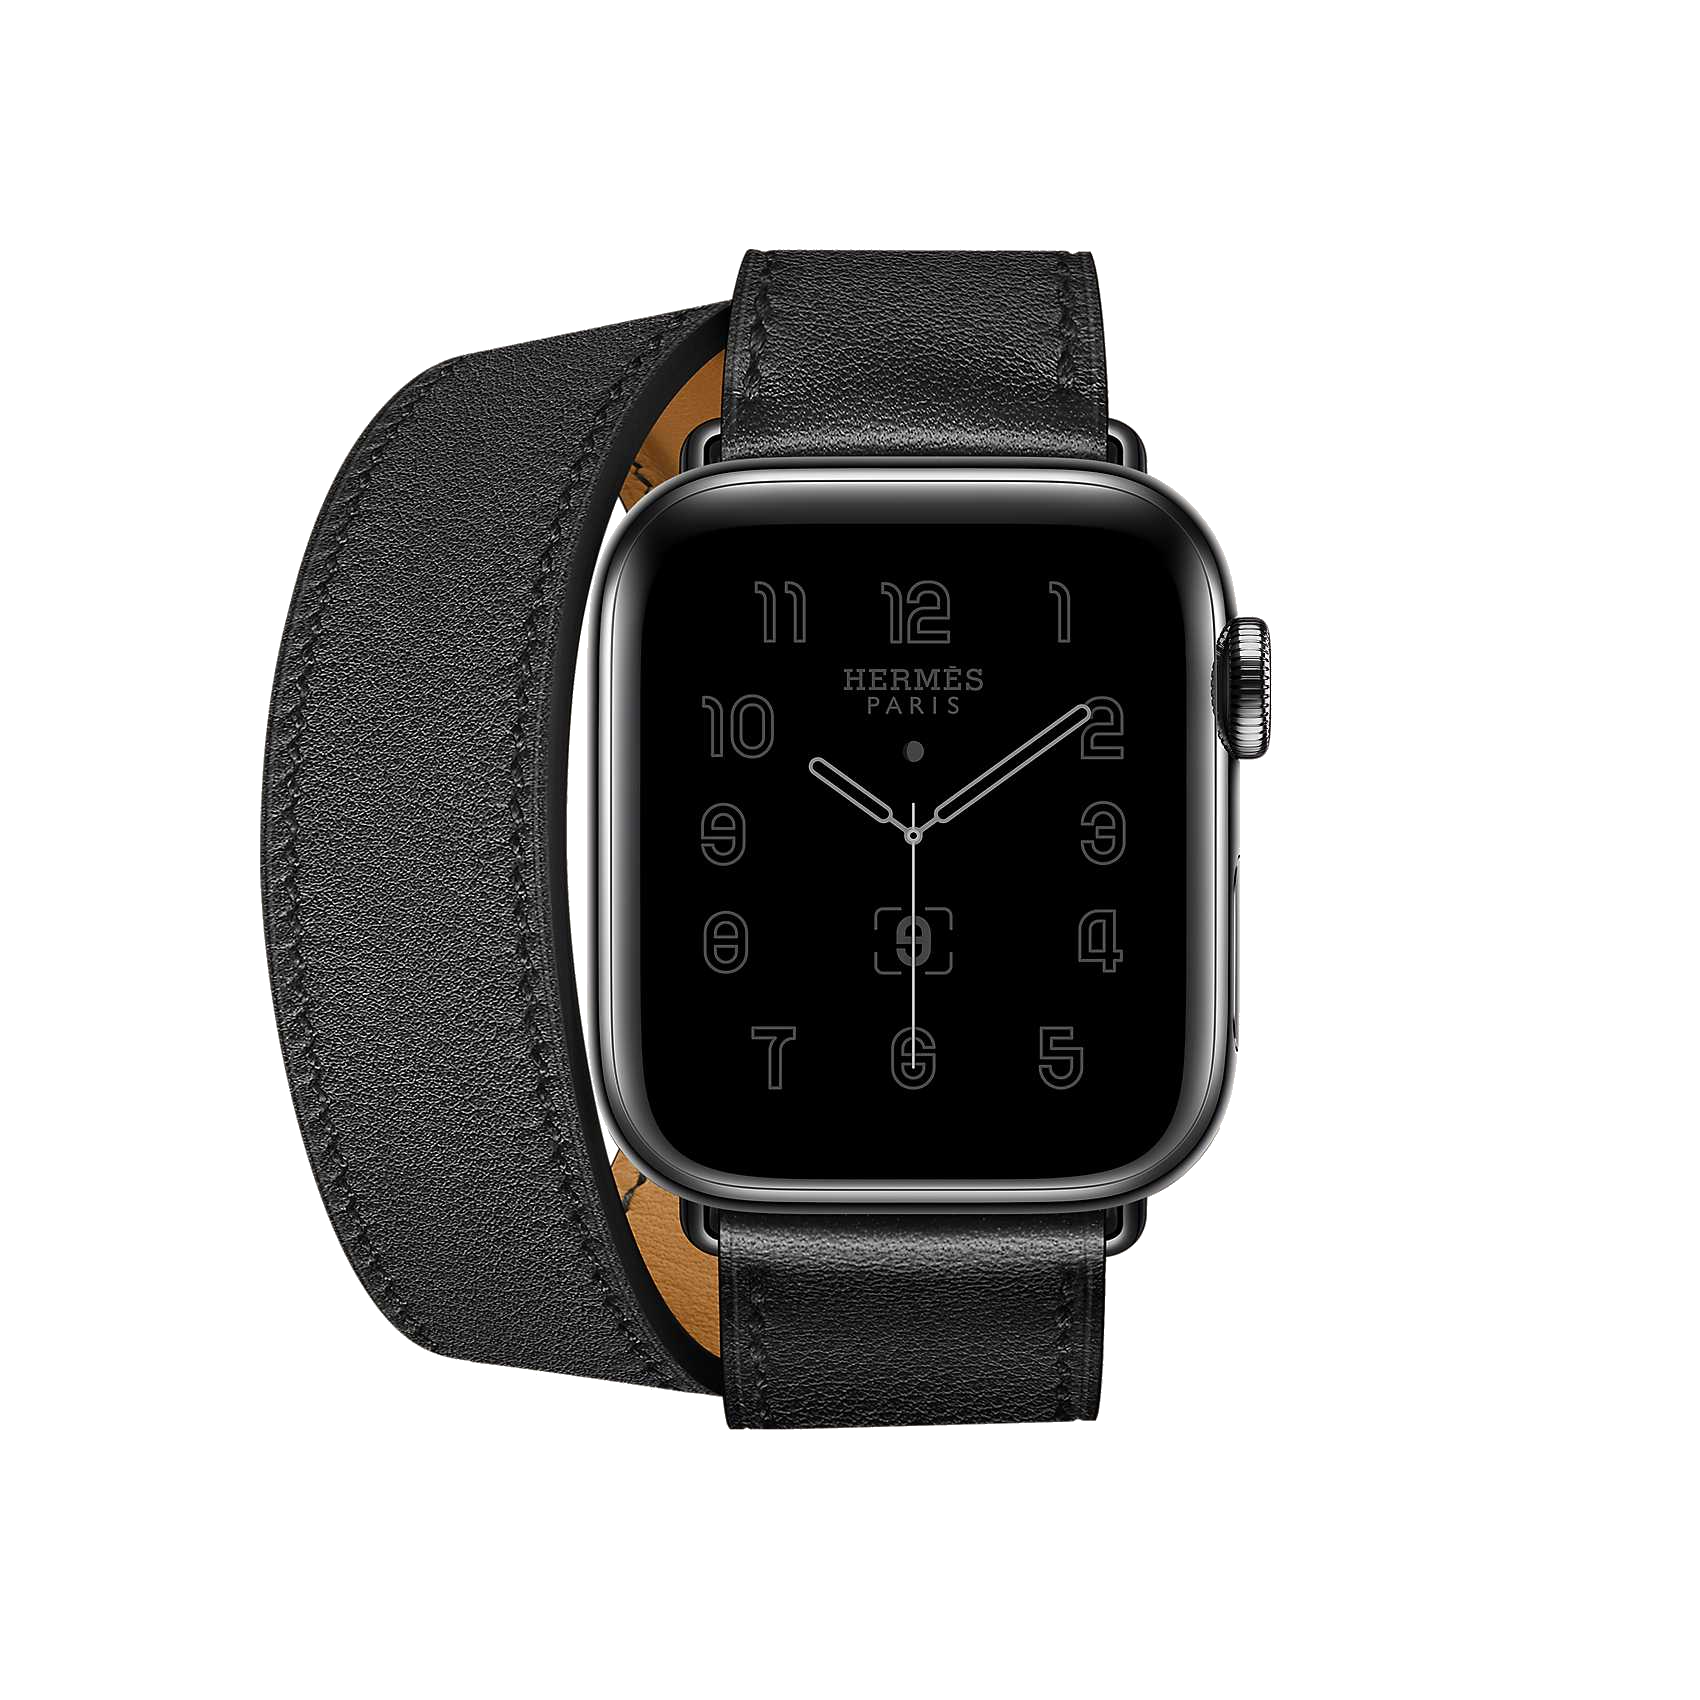 Space Black Series 6 case & Band Apple Watch Hermes Double Tour 40 mm ...